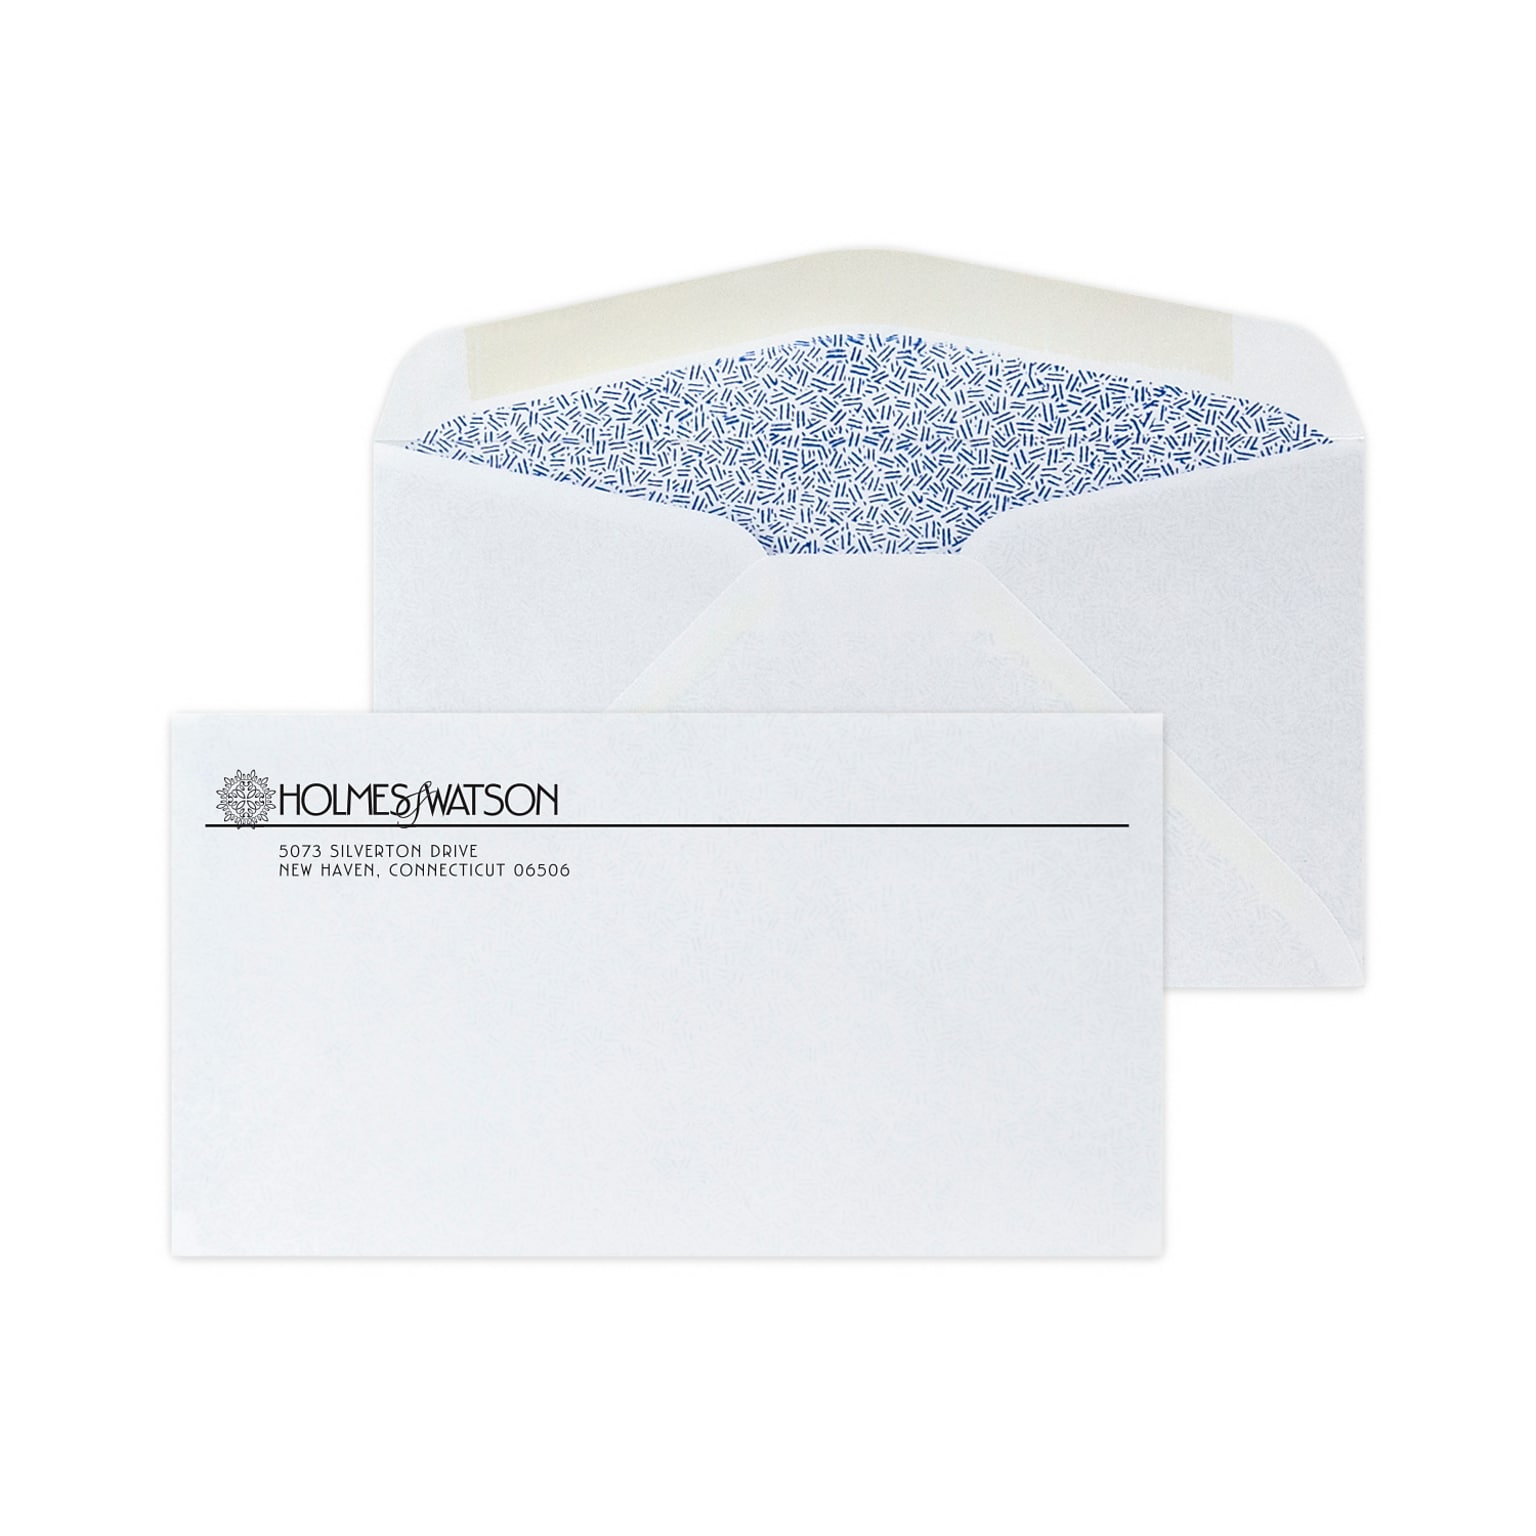 Custom #6-3/4 Diagonal Seam Standard Envelopes with Security Tint, 3 5/8 x 6 1/2, 24# White Wove, 1 Standard Ink, 250 / Pack